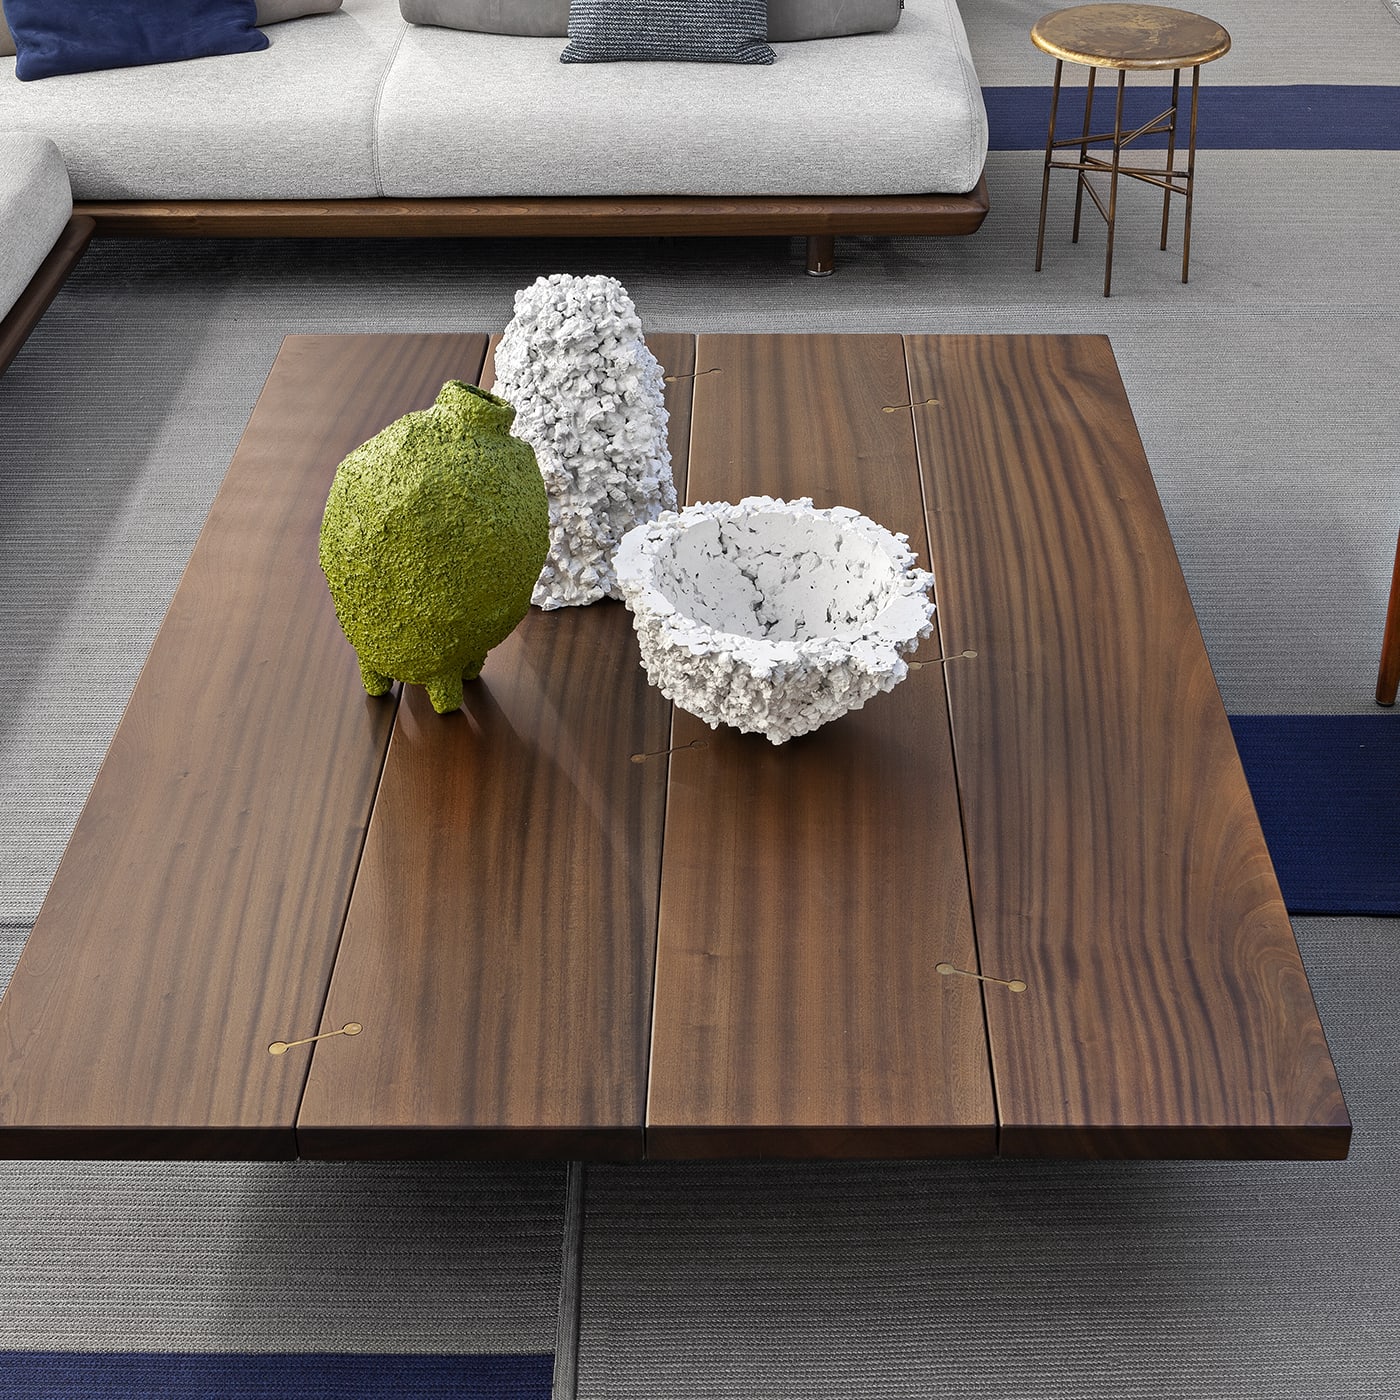 10th Joint Rectangular Coffee Table by Massimo Castagna - Exteta